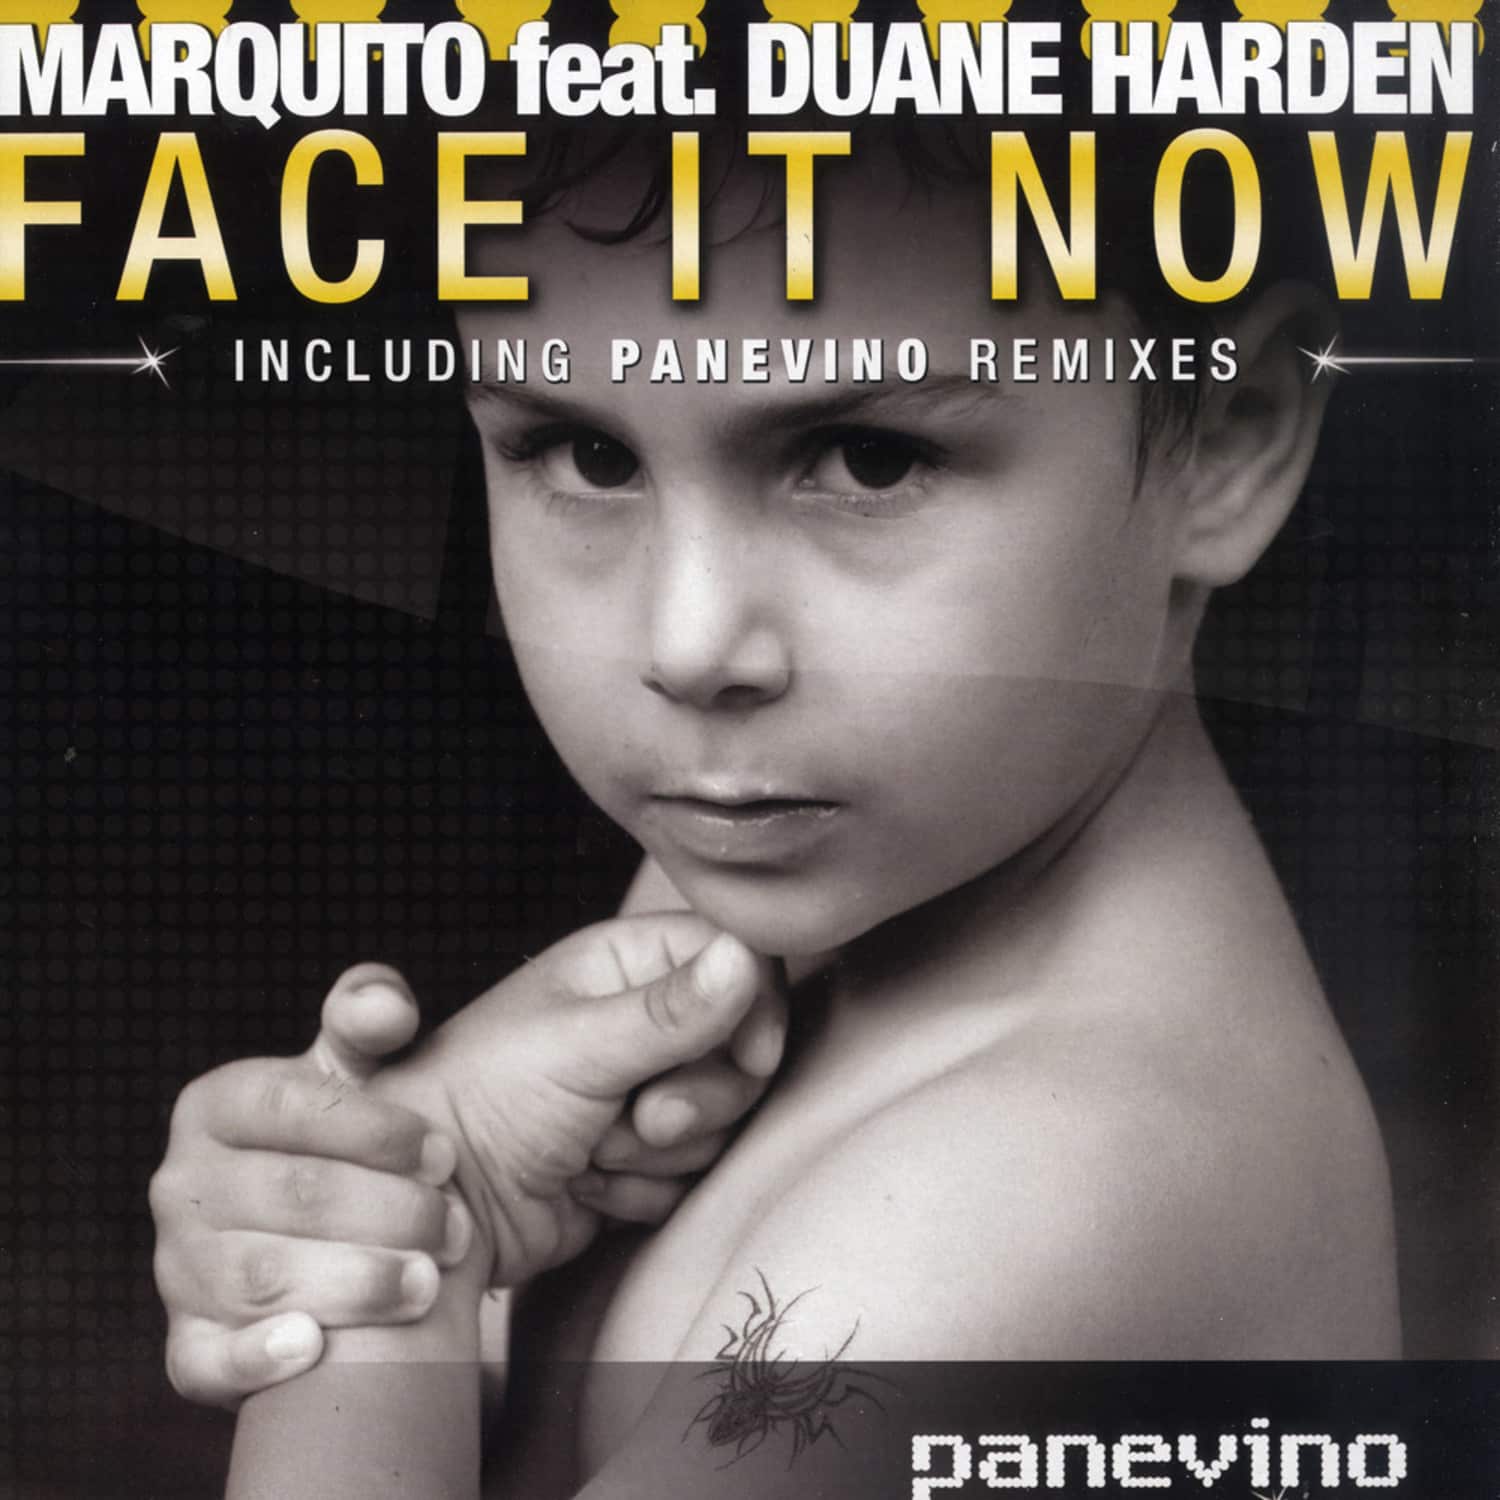 Marqito feat. Duane Harden - FACE IT NOW